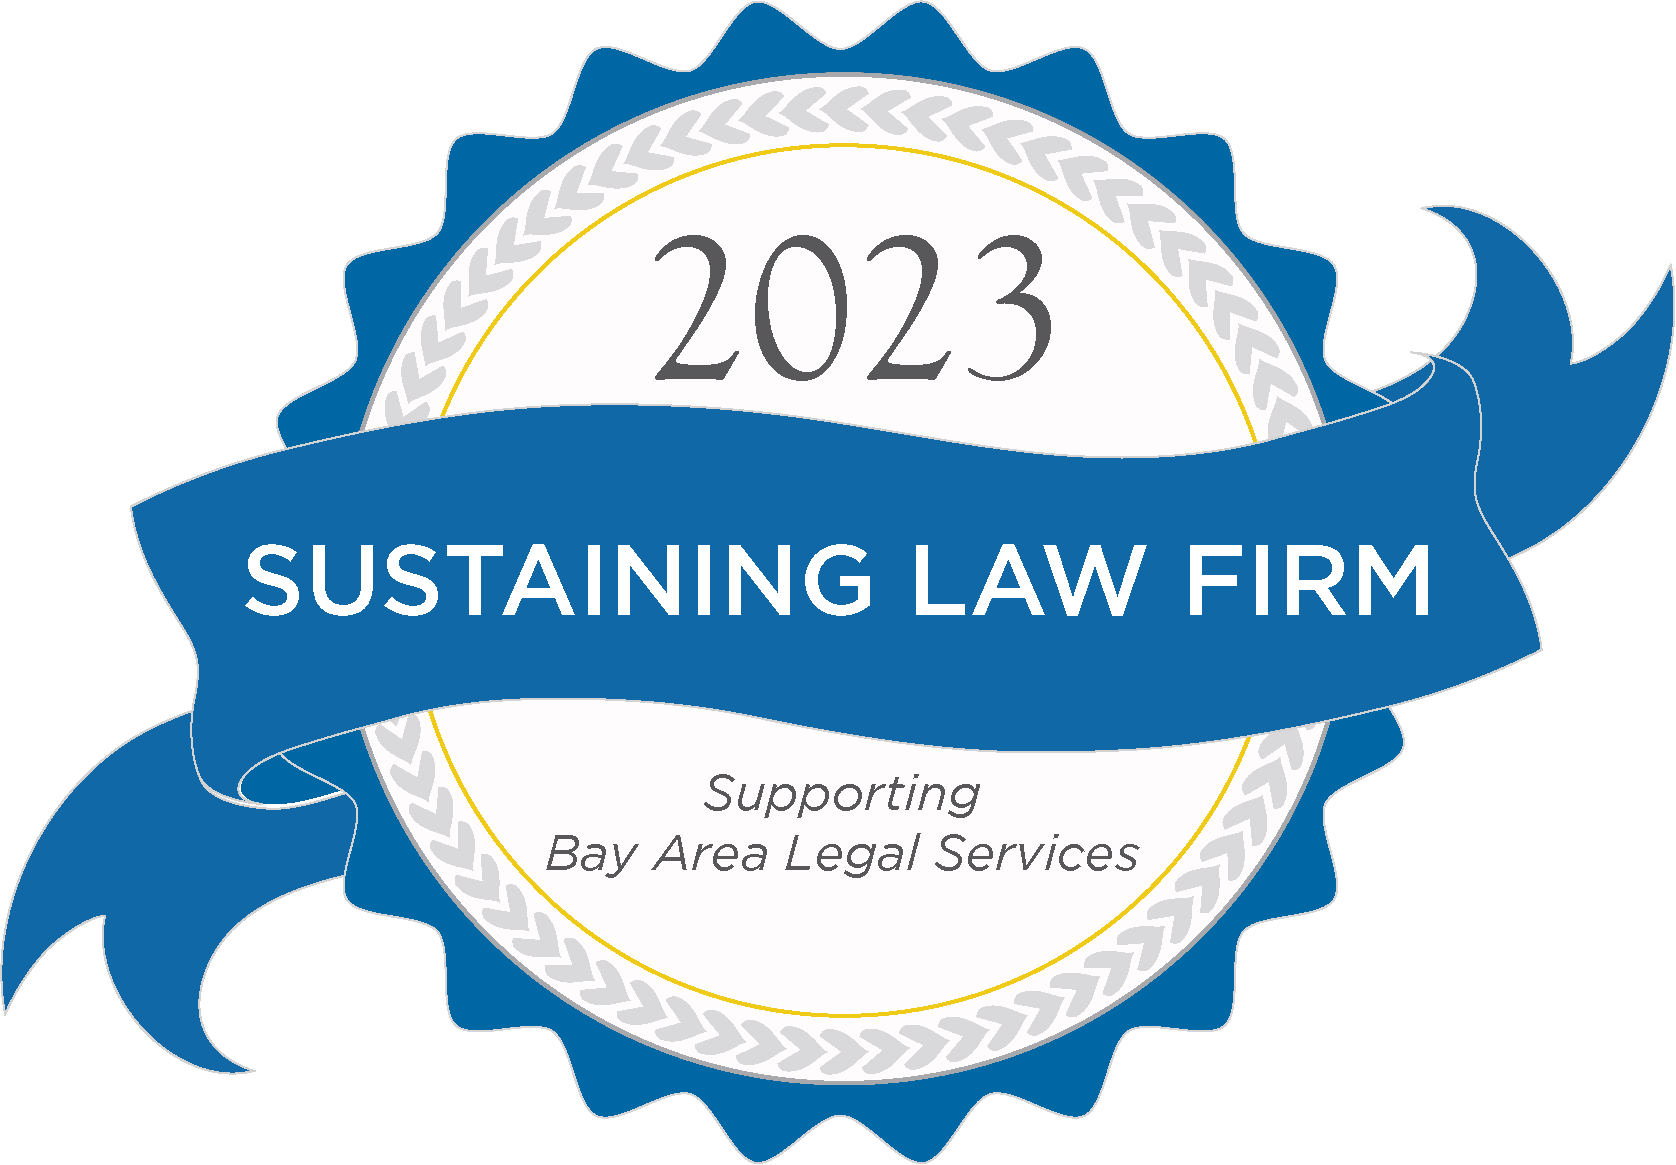 2023 | Sustaining Law Firm | Supporting Bay Area Legal Services